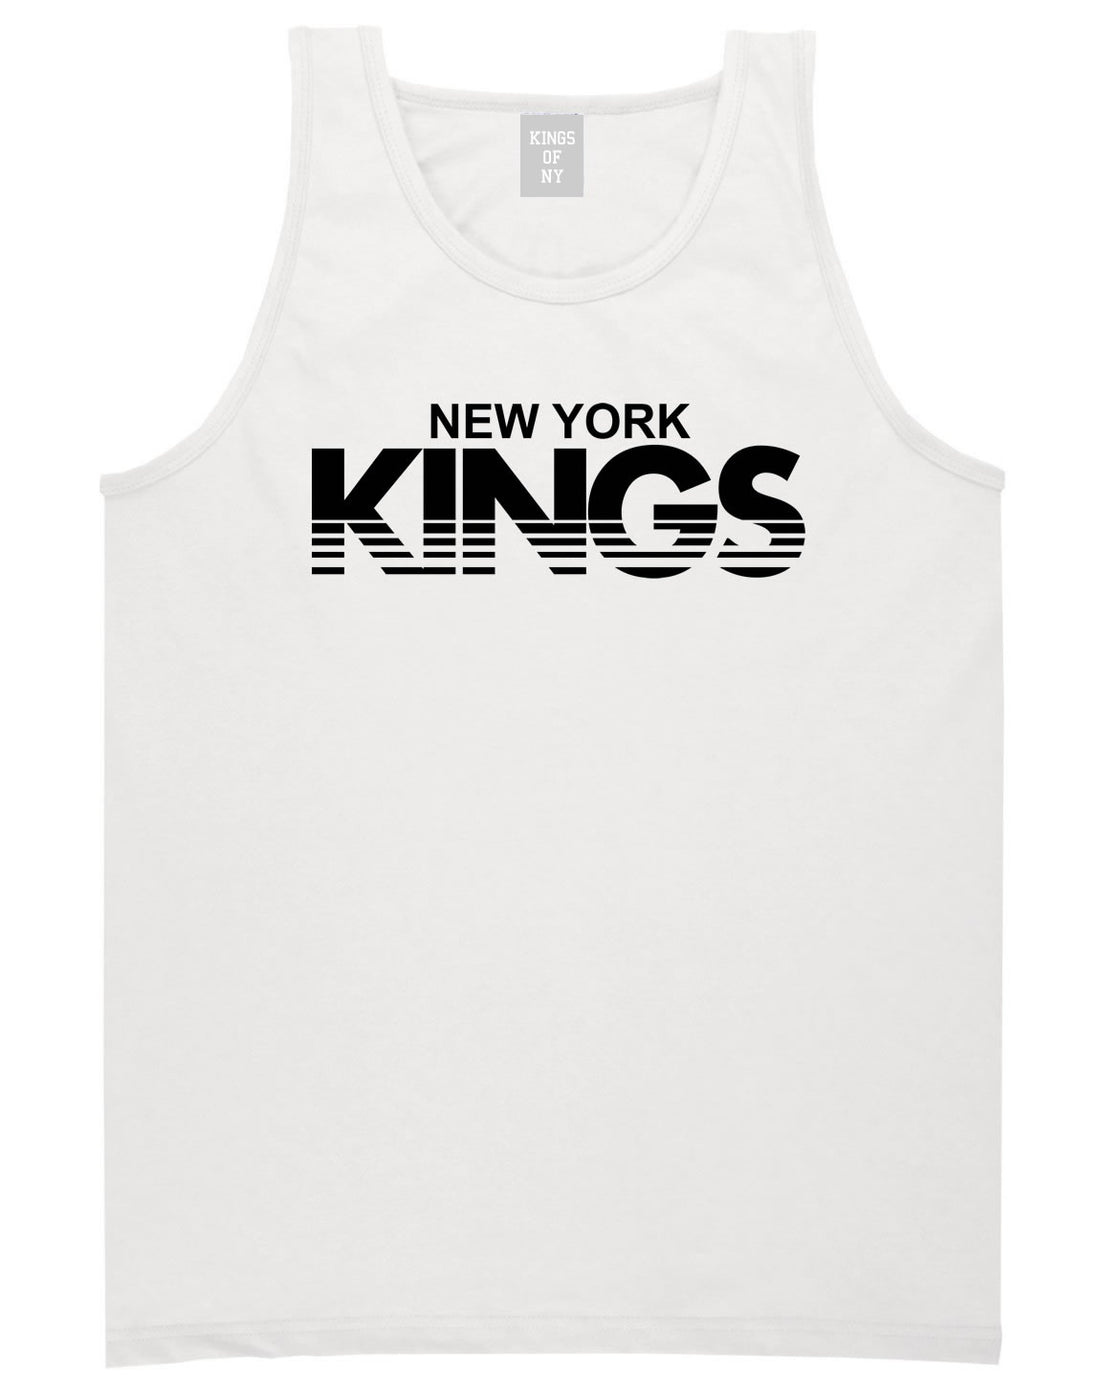 New York Kings Racing Style Tank Top in White by Kings Of NY